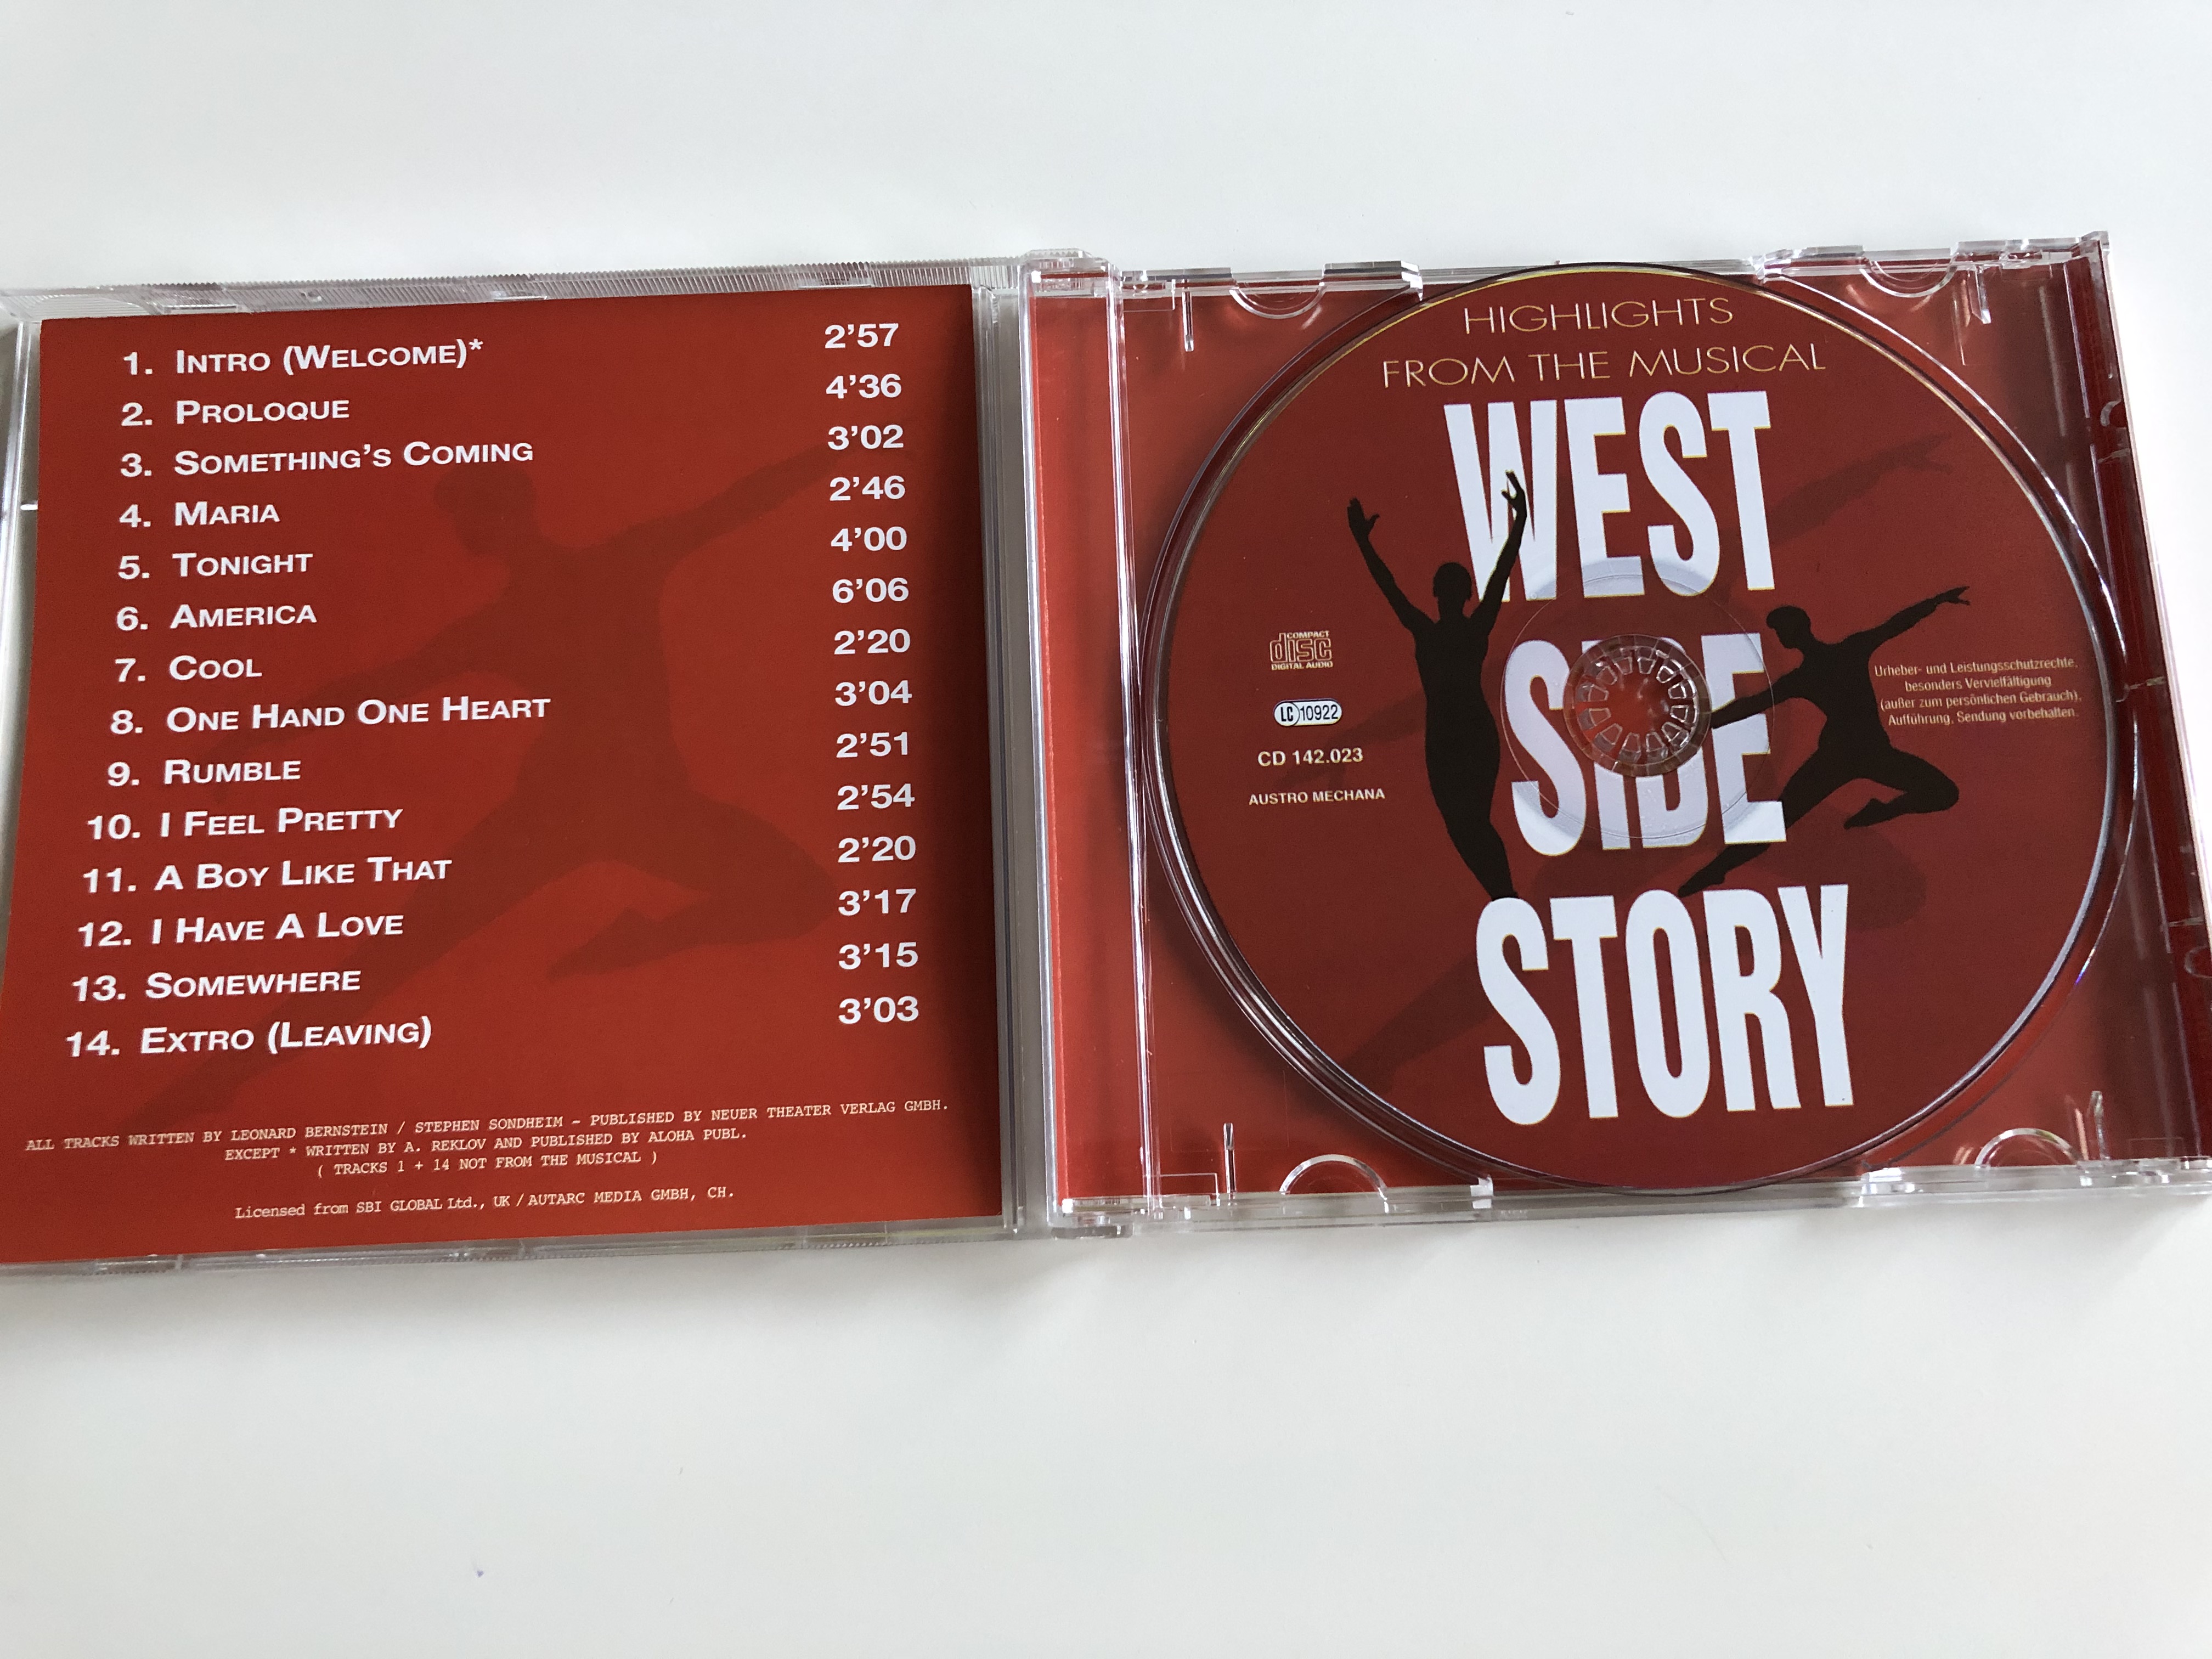 west-side-story-highlights-from-the-musical-something-s-coming-maria-tonight-america-cool-rumble-audio-cd-2003-142.023-lc10922-2-.jpg